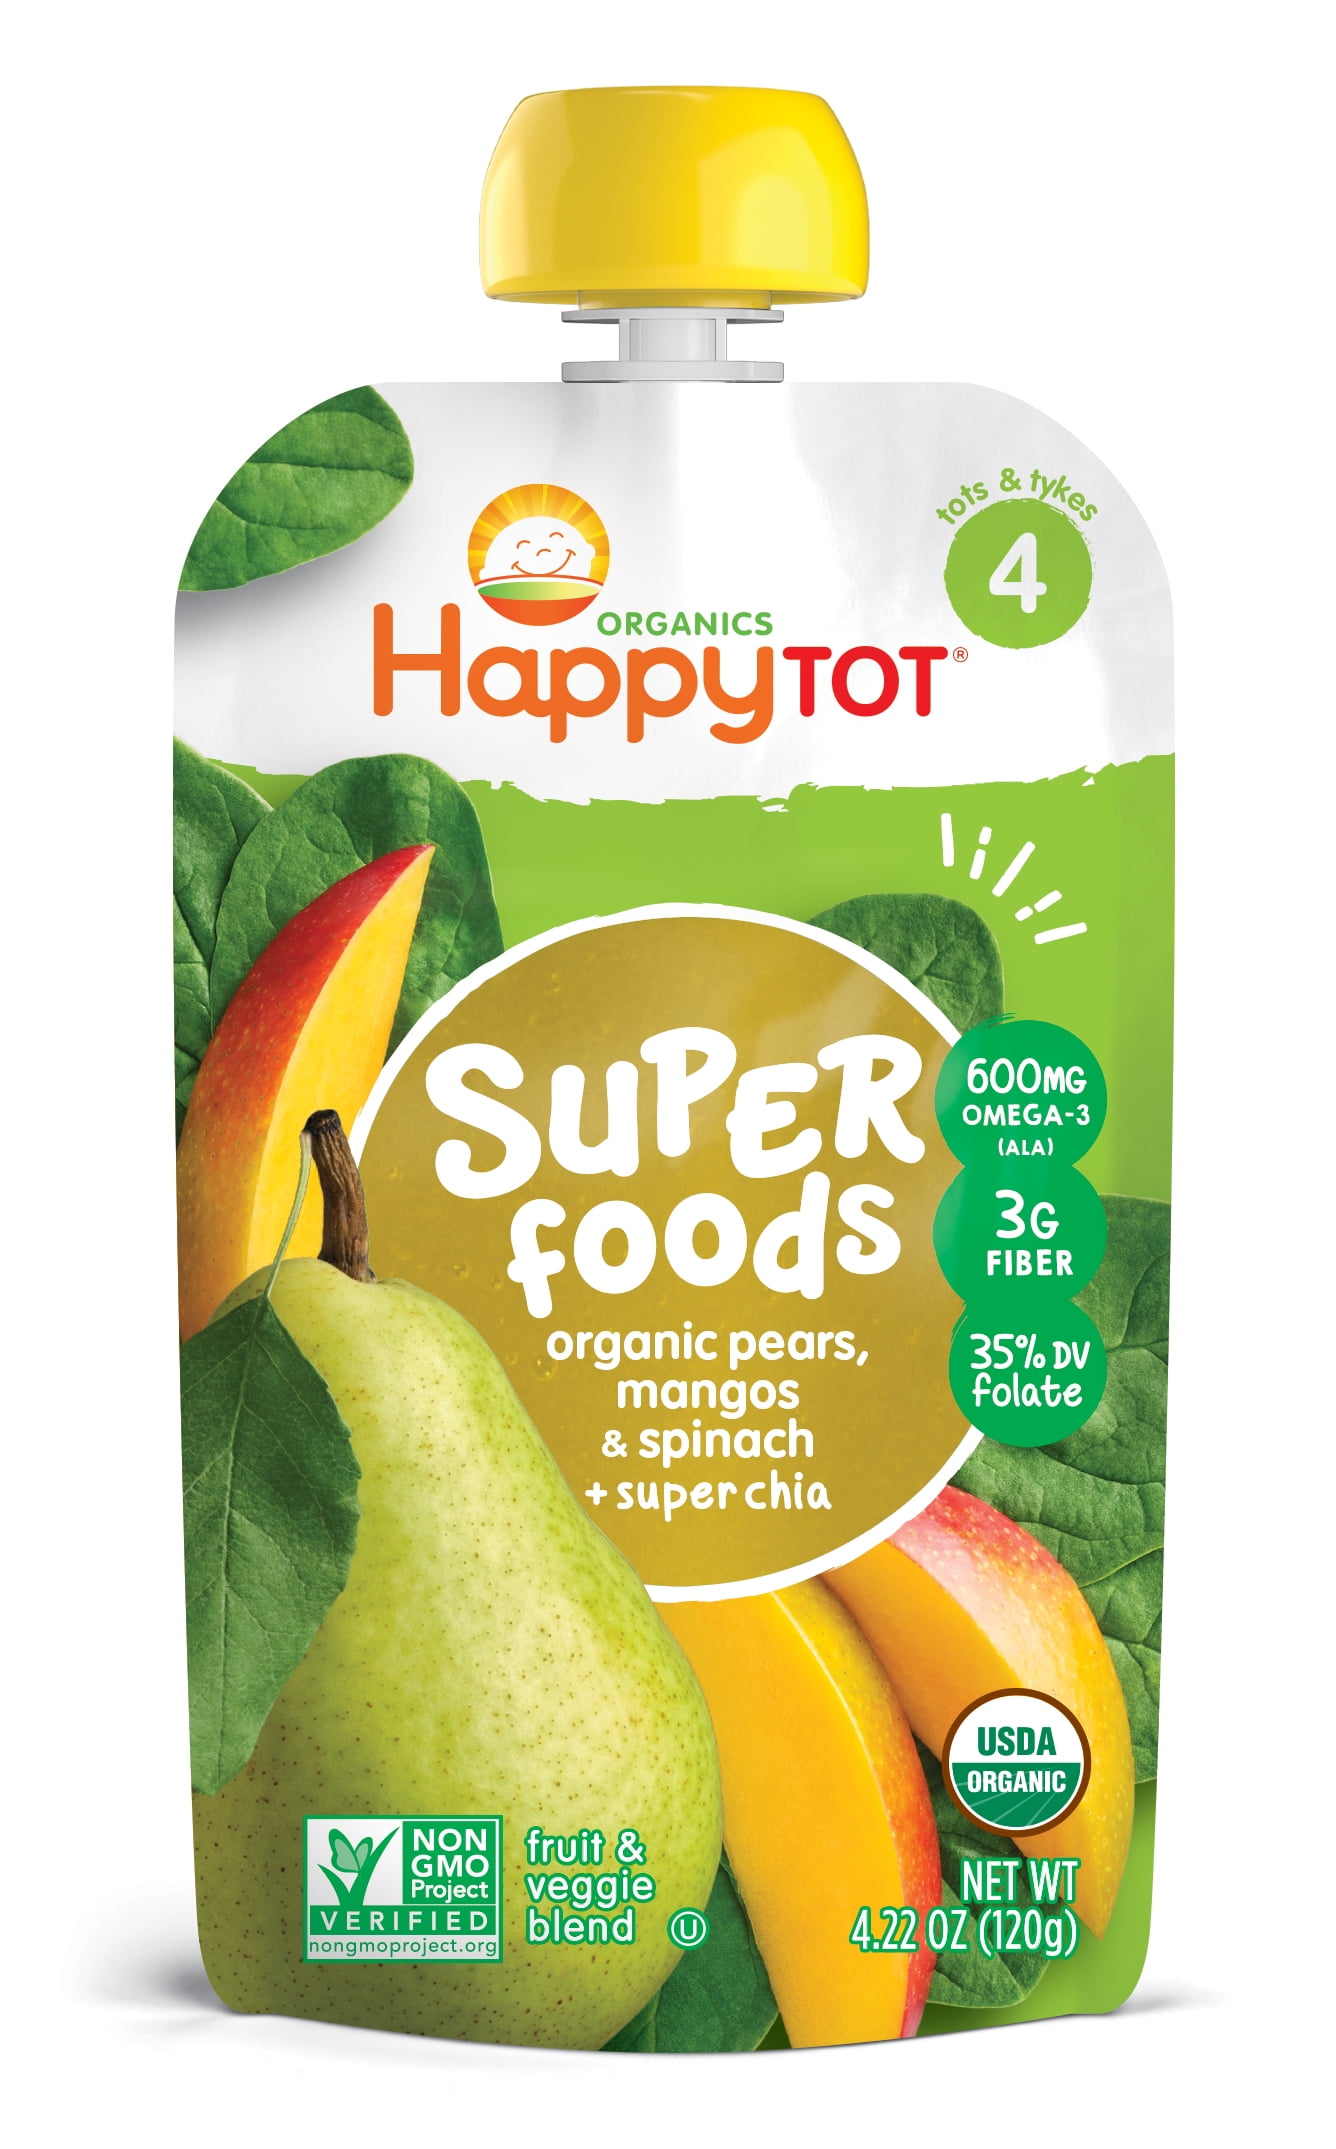 Happy Tot Superfoods Organic Pears, Mangos & Spinach + Super Chia Fruit & Veggie Blend 4.22 oz. Pouch